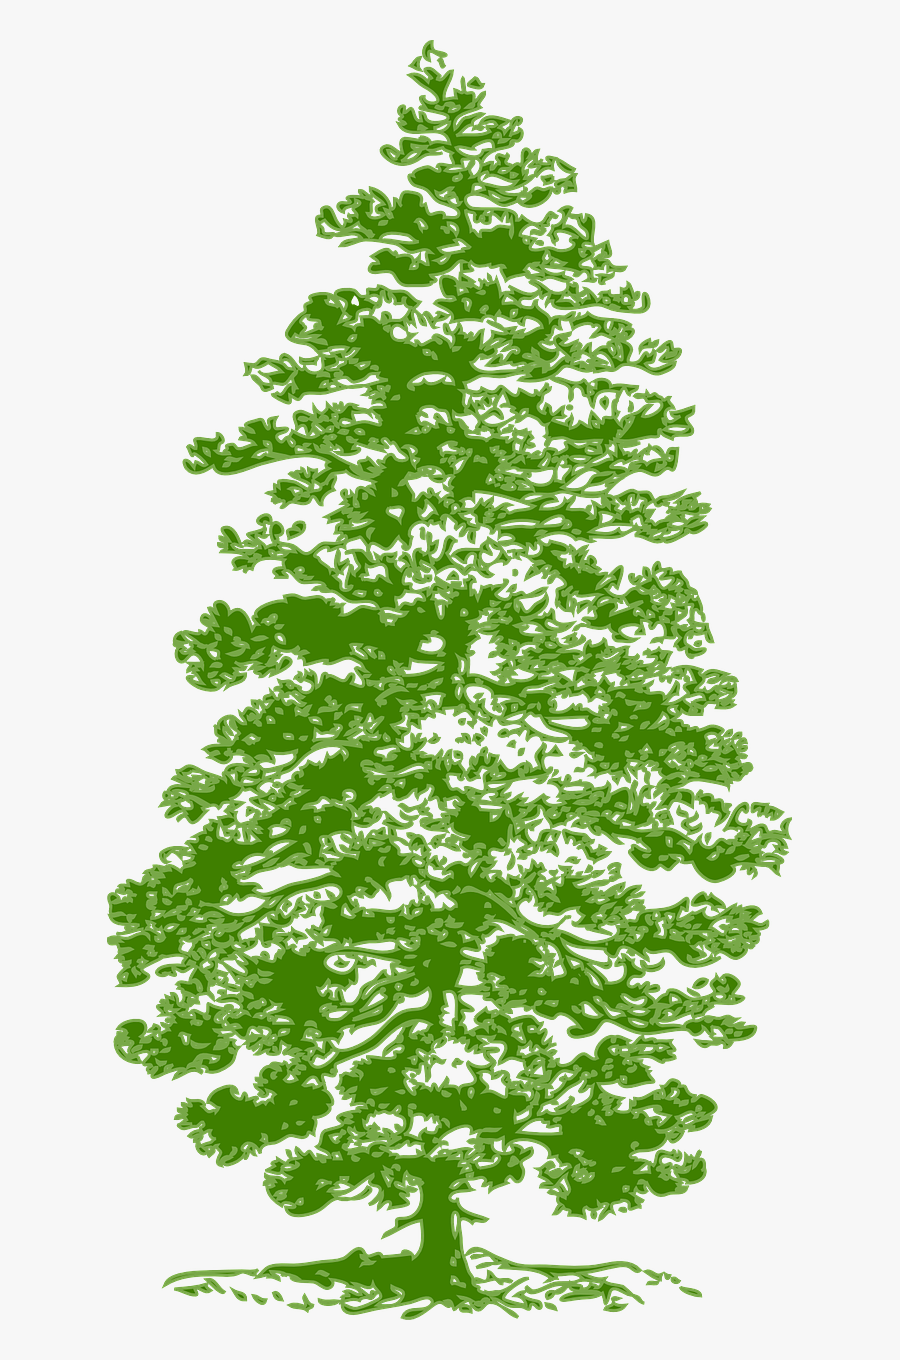 Tree Pine Huge Free Picture - Tree Silhouette Png Green, Transparent Clipart